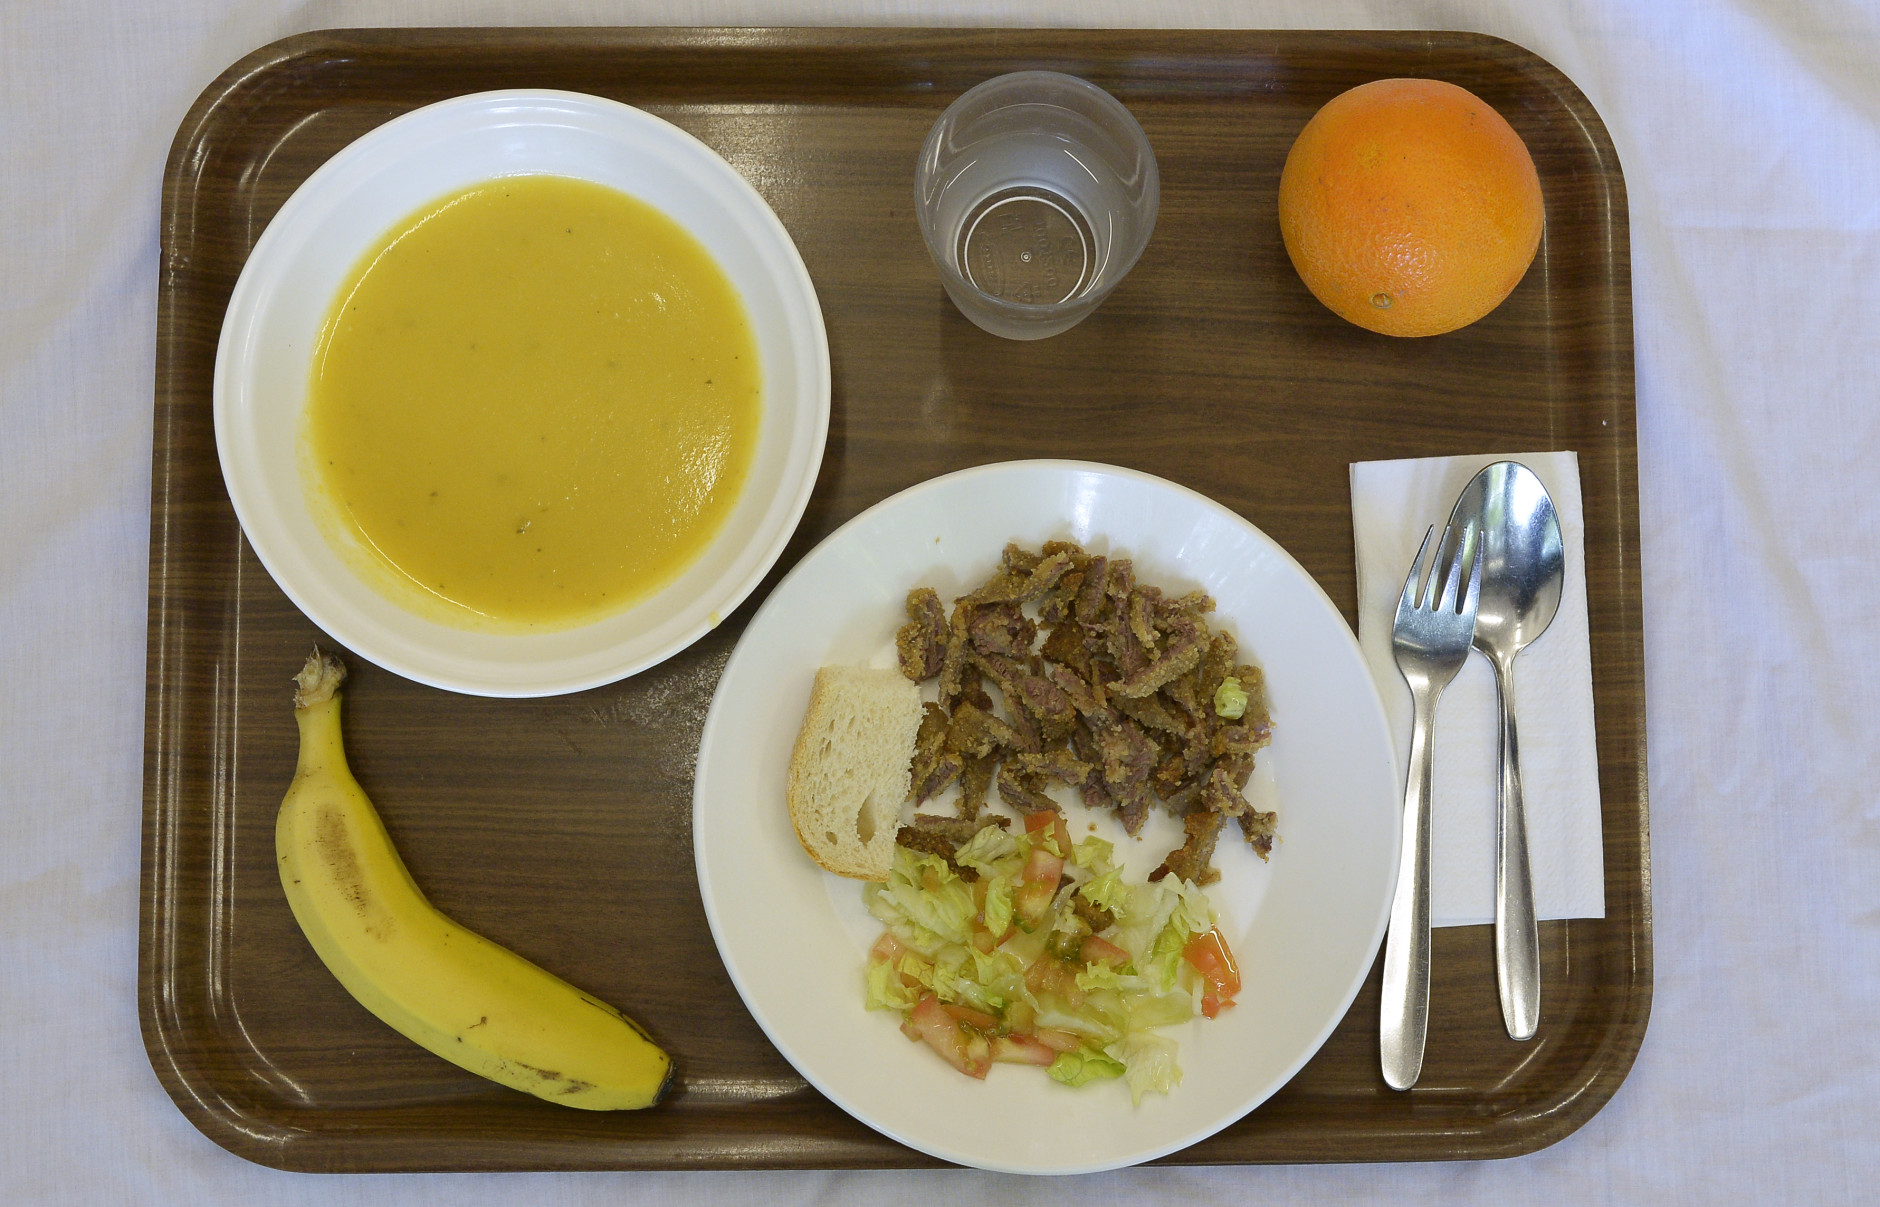 A school lunch at El Caminet del Besos kindergarten is pictured in Barcelona, Spain, Tuesday, May 6, 2014. The lunch is composed of cream of vegetable soup, pan-fried breast of veal with salad, a piece of bread, an orange or banana and water. Most countries seem to put a premium on feeding school children a healthy meal at lunchtime. U.S. first lady Michelle Obama is on a mission to make American school lunches healthier too. (AP Photo/Manu Fernandez)